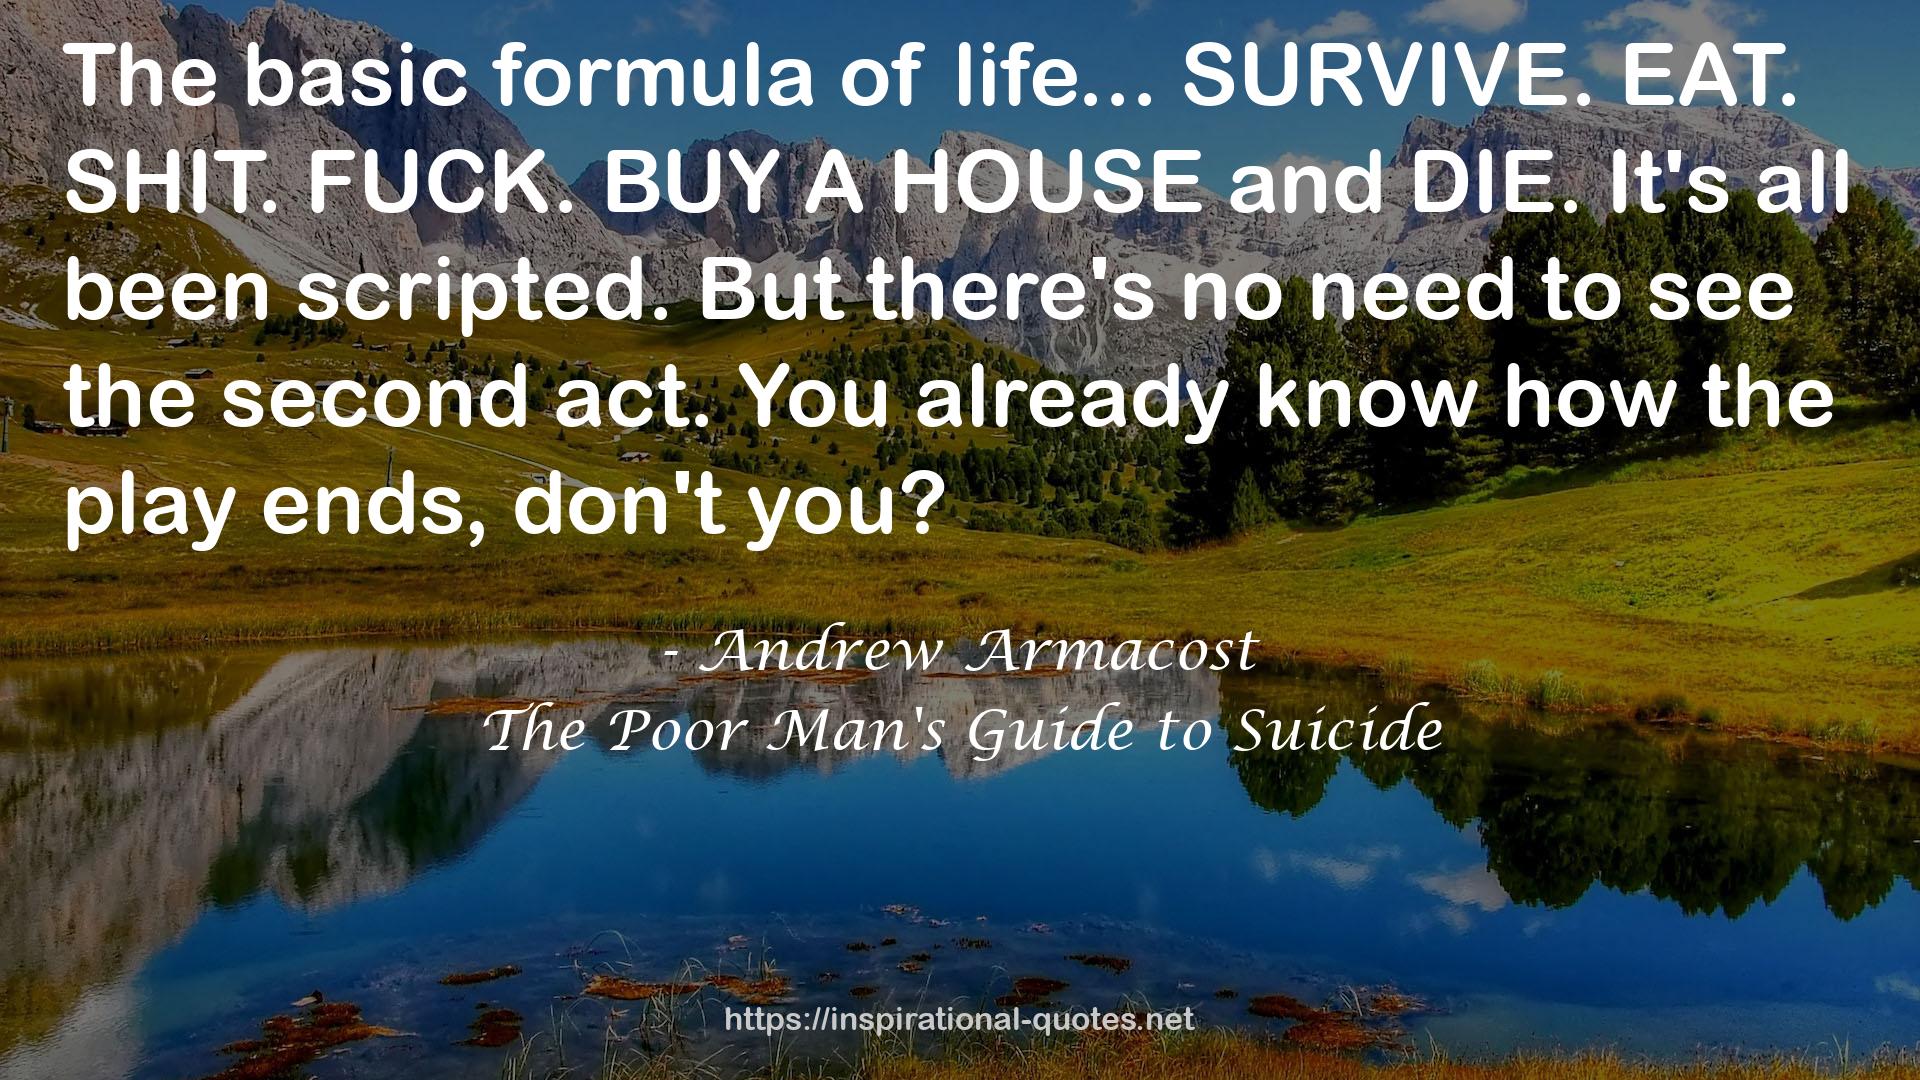 Andrew Armacost QUOTES